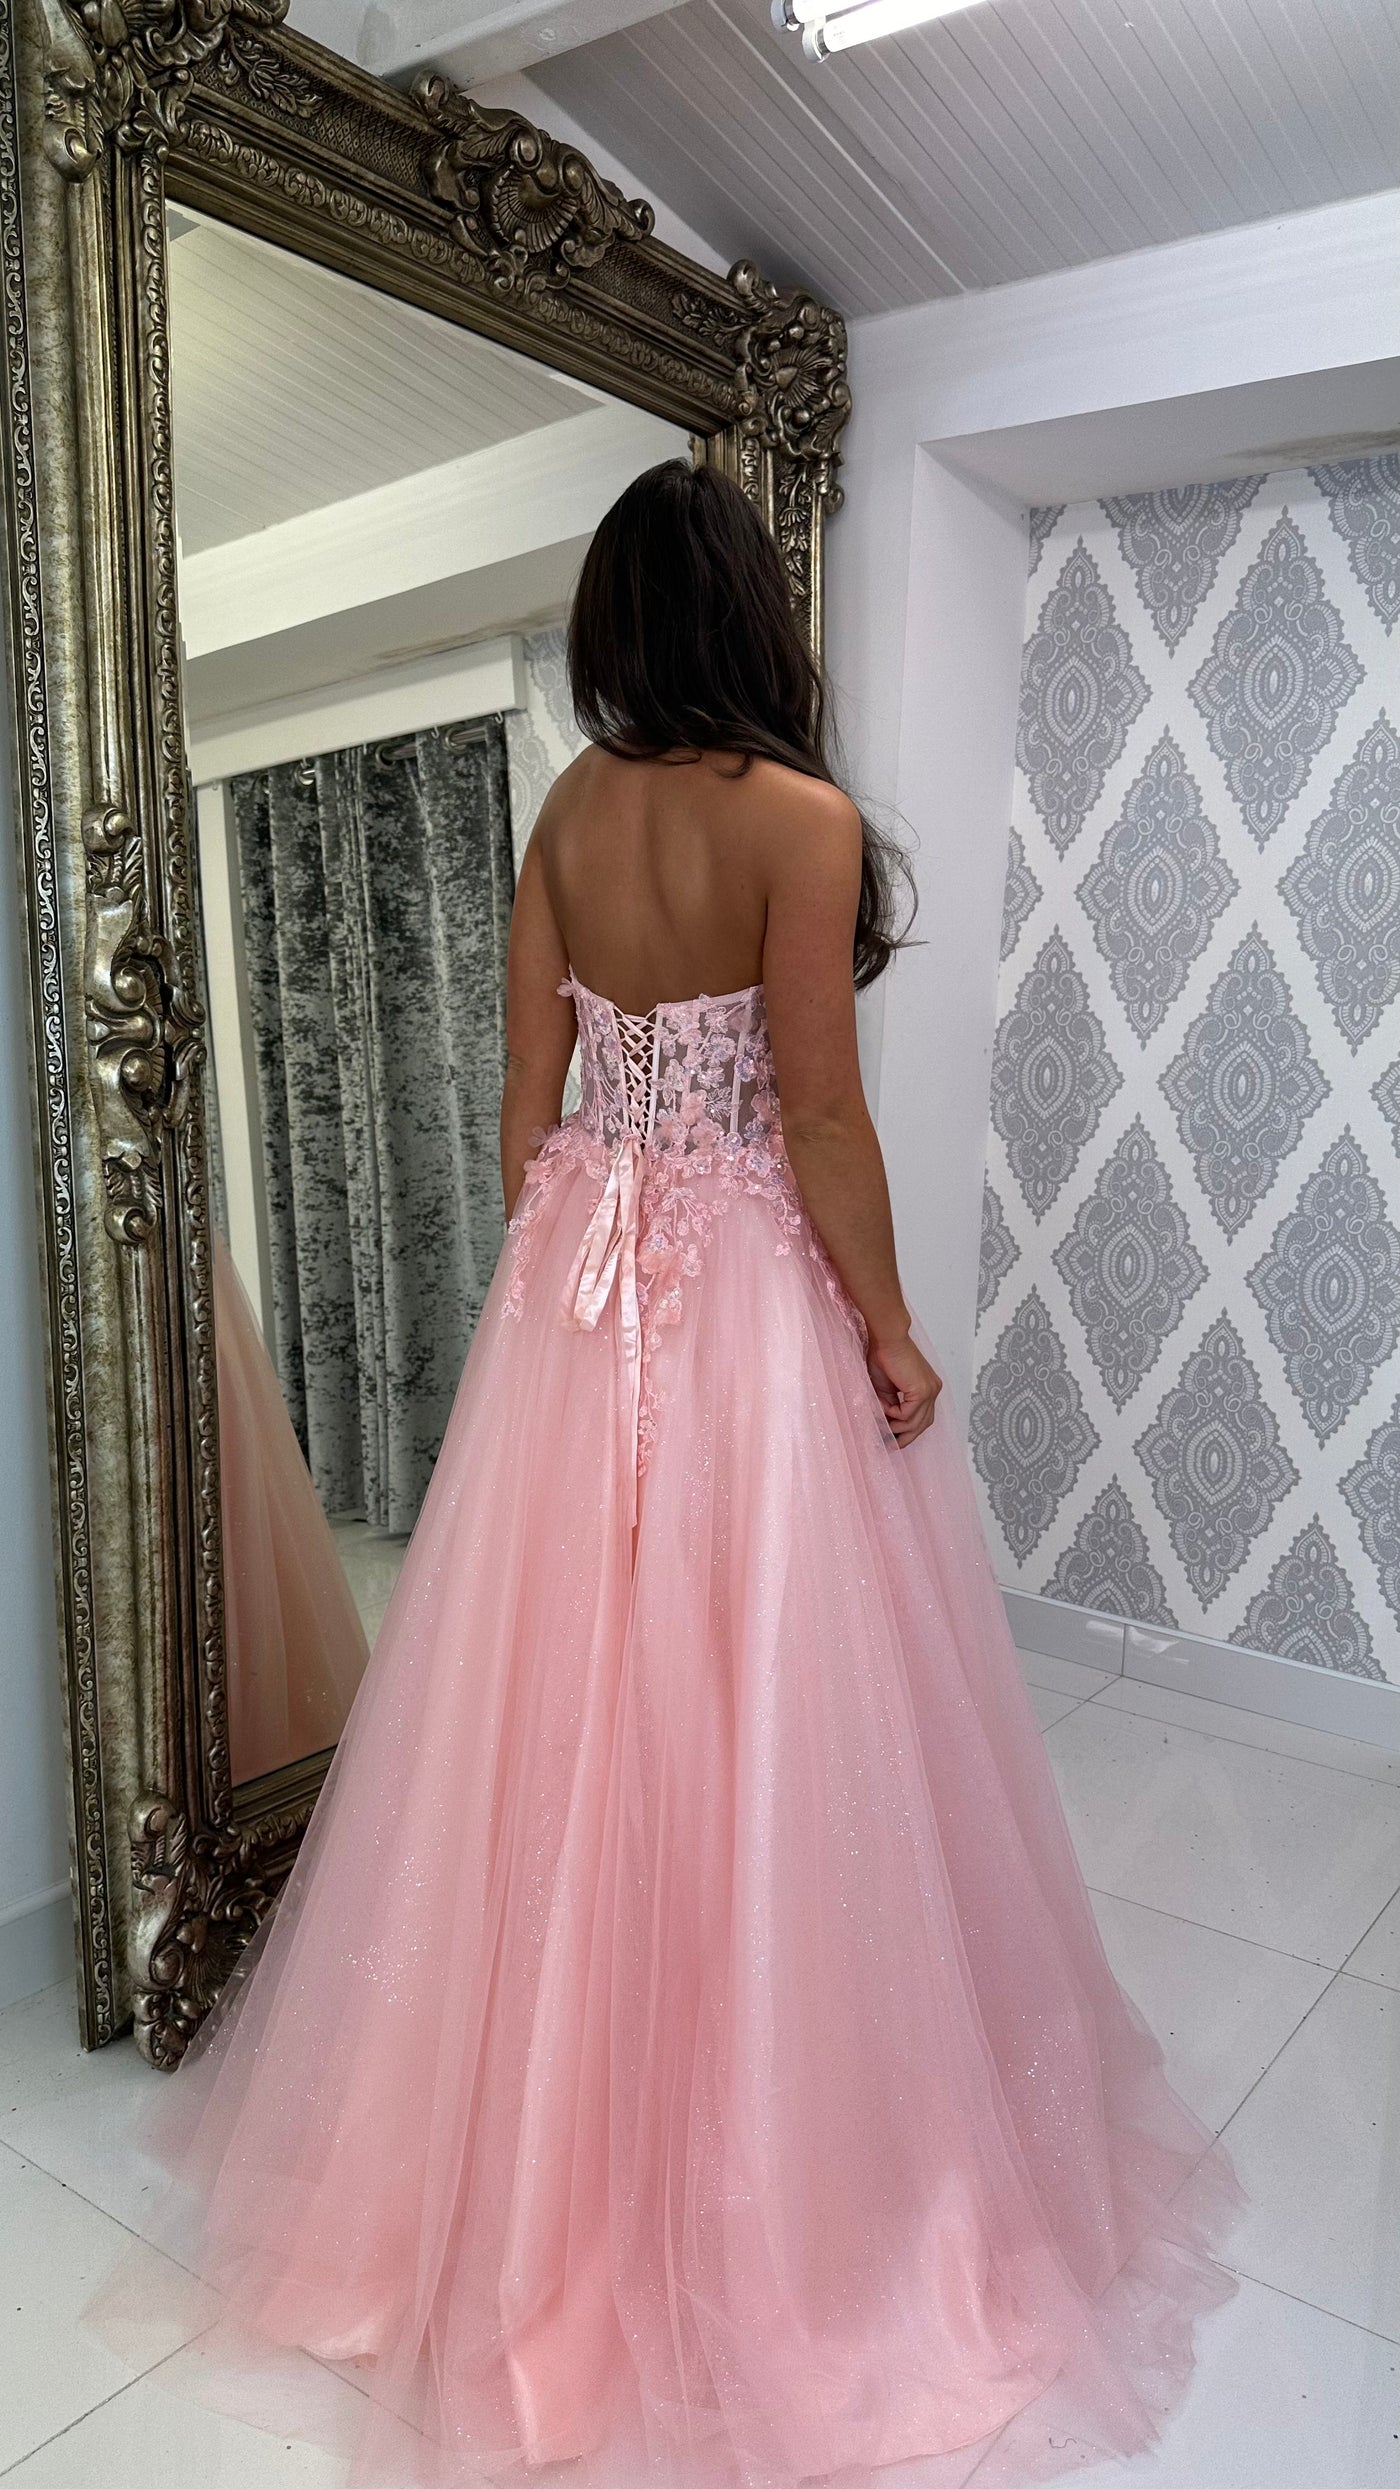 Peach Corset Style Strapless Ball Gown